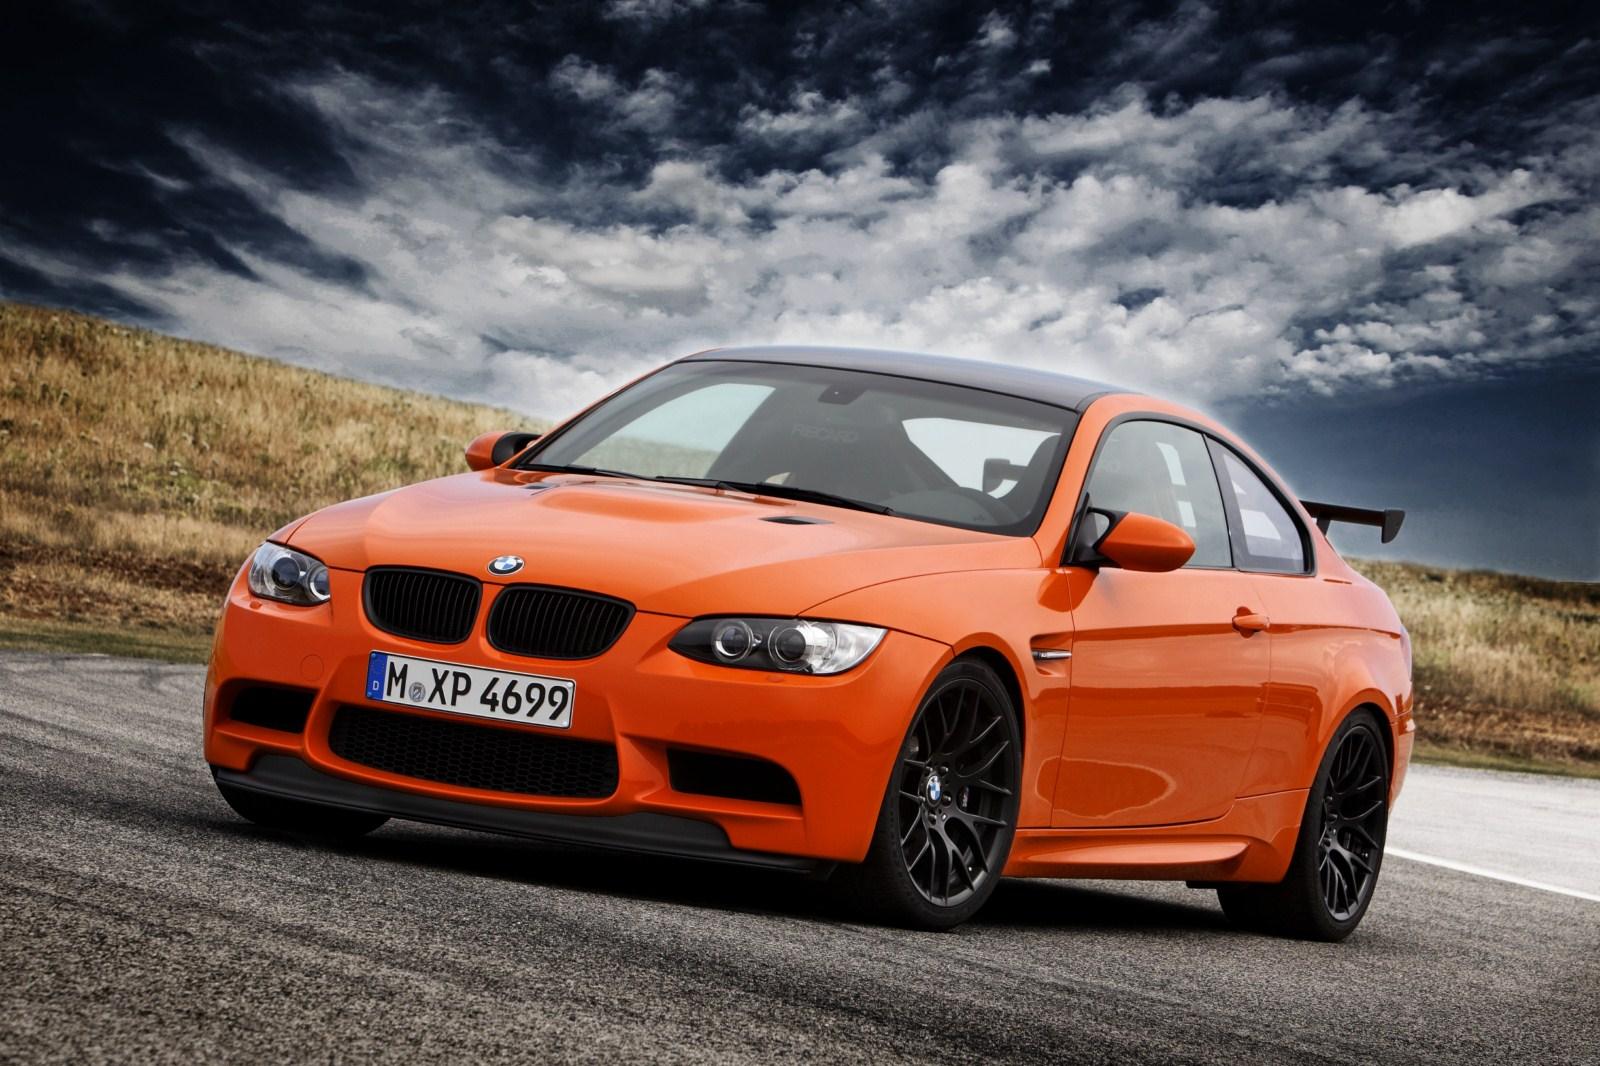 The Bmw M3 Gts Still Sells For